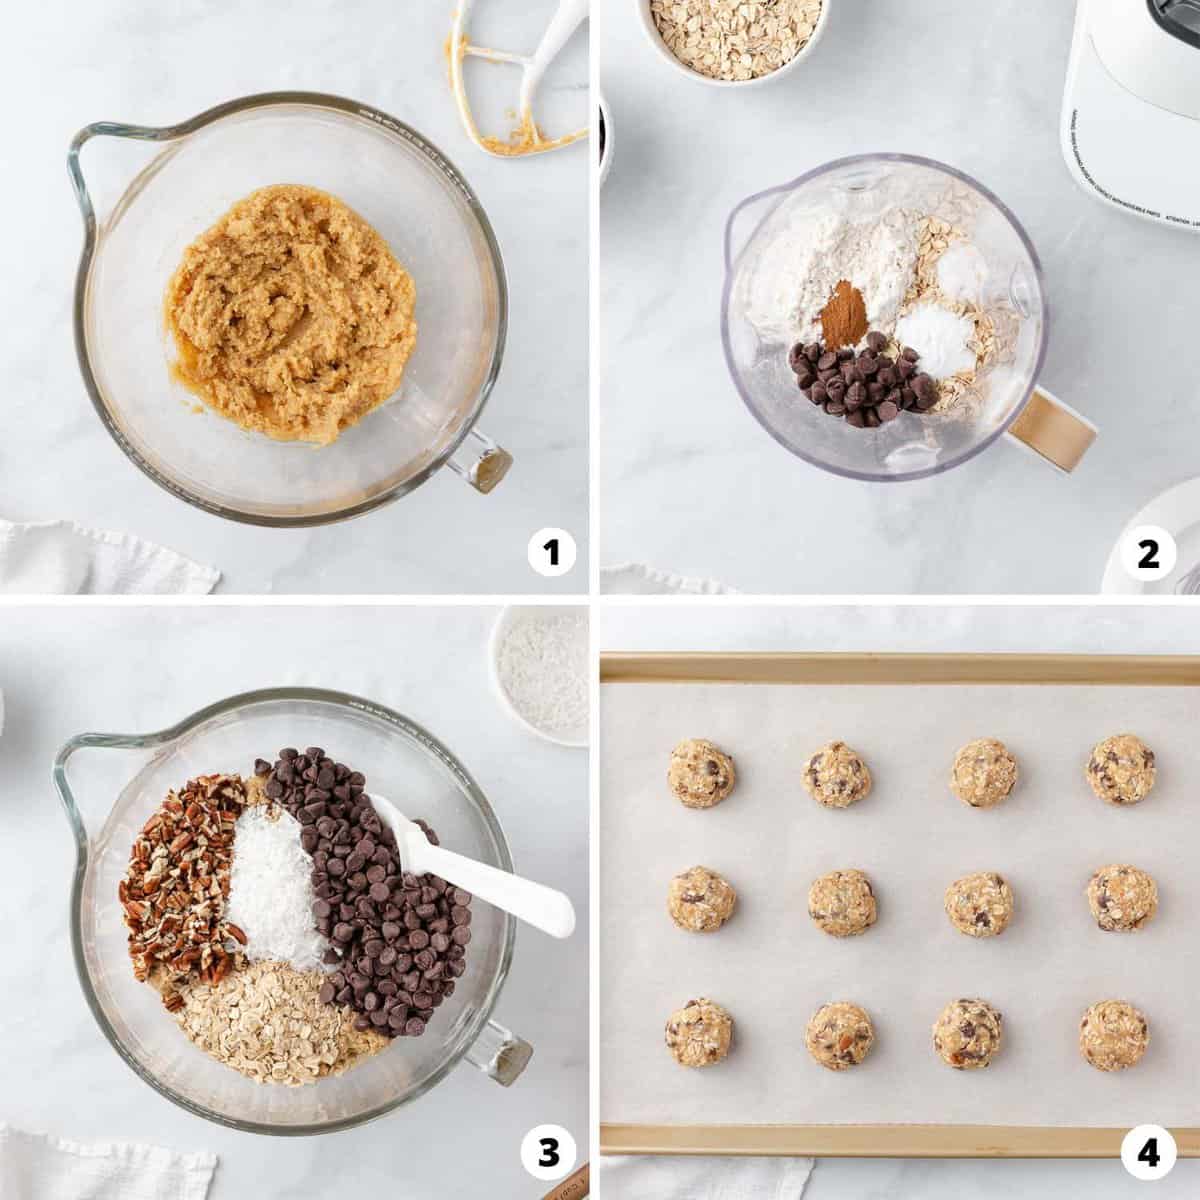 Showing how to make cowboy cookies in a 4 step collage.